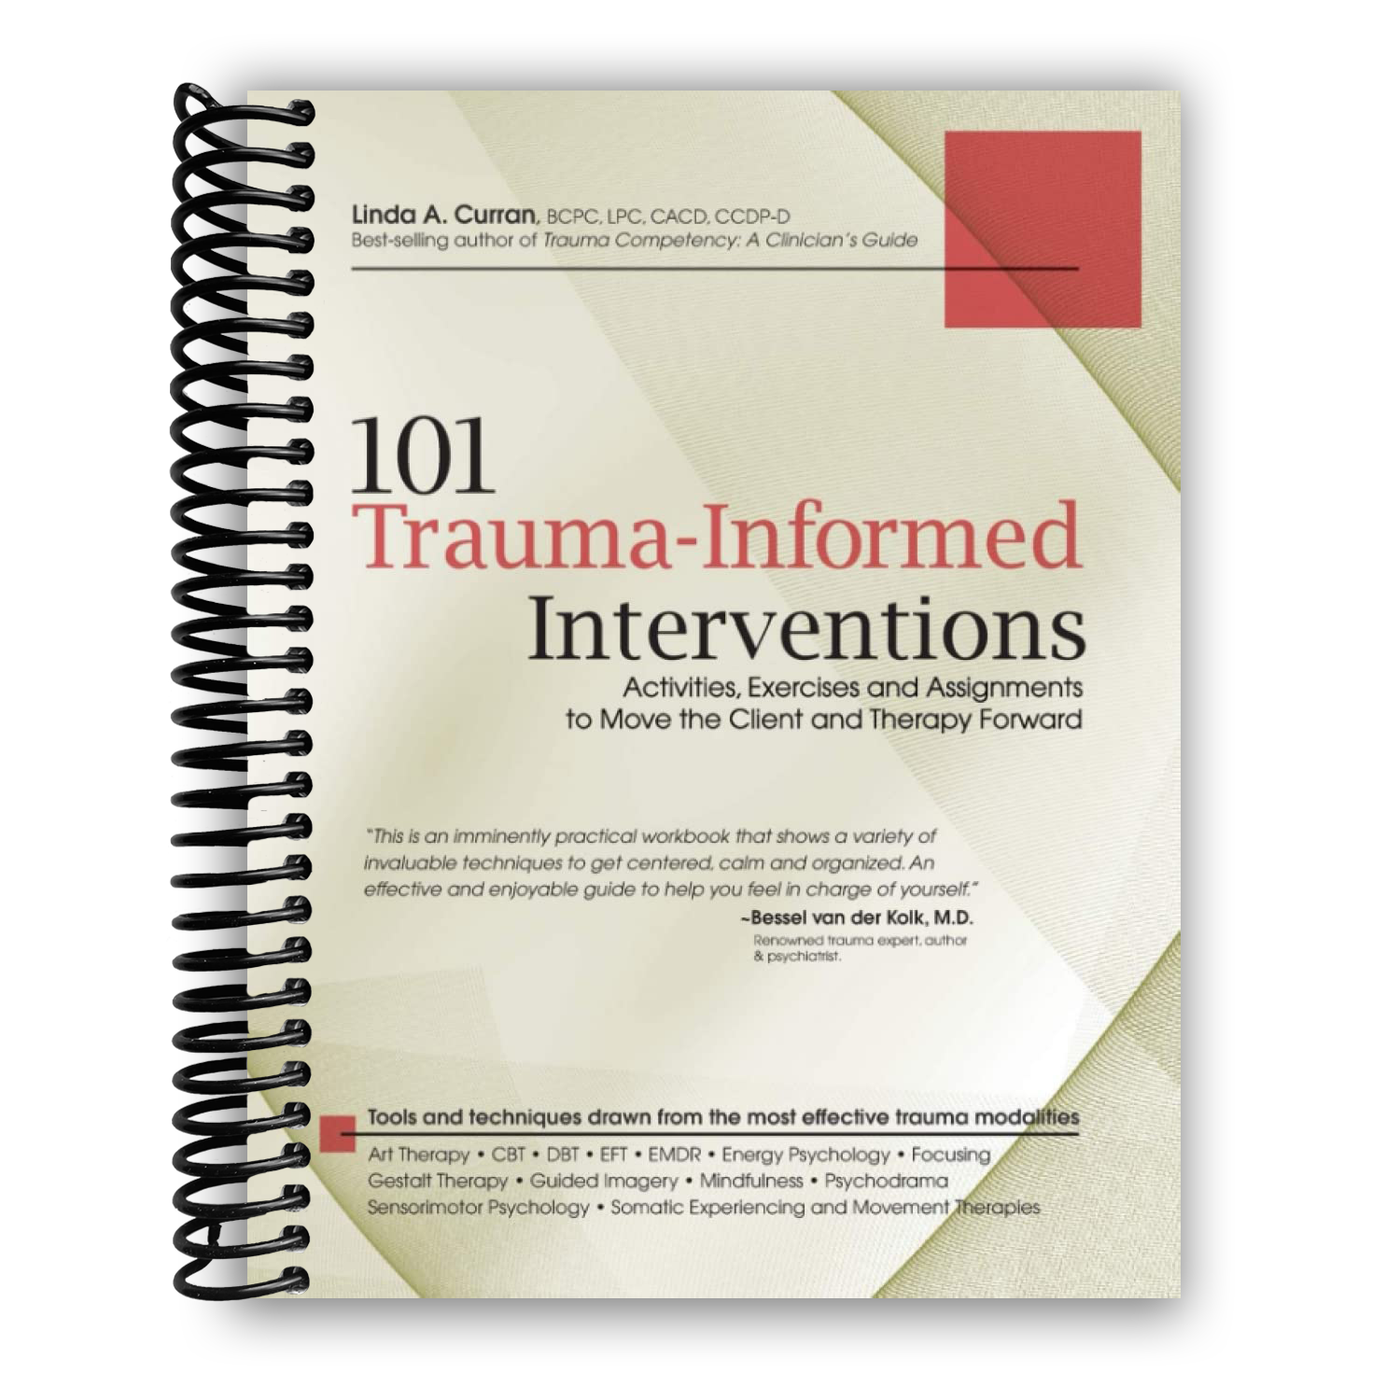 101 Trauma-Informed Interventions: Activities, Exercises and Assignments to Move the Client and Therapy(Spiral Bound)